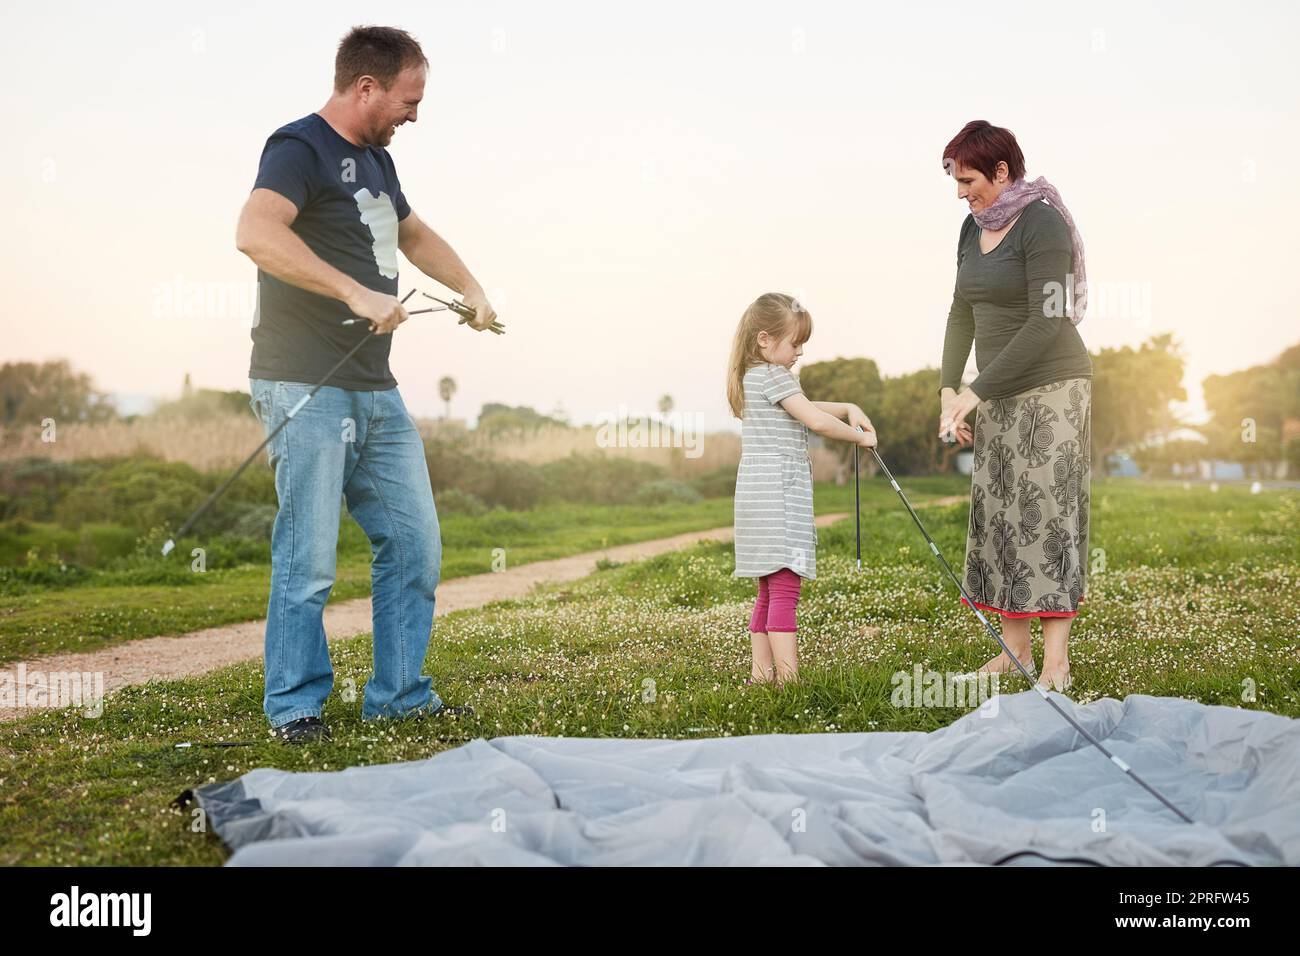 Many hands make light work. a young family putting up a tent together. Stock Photo